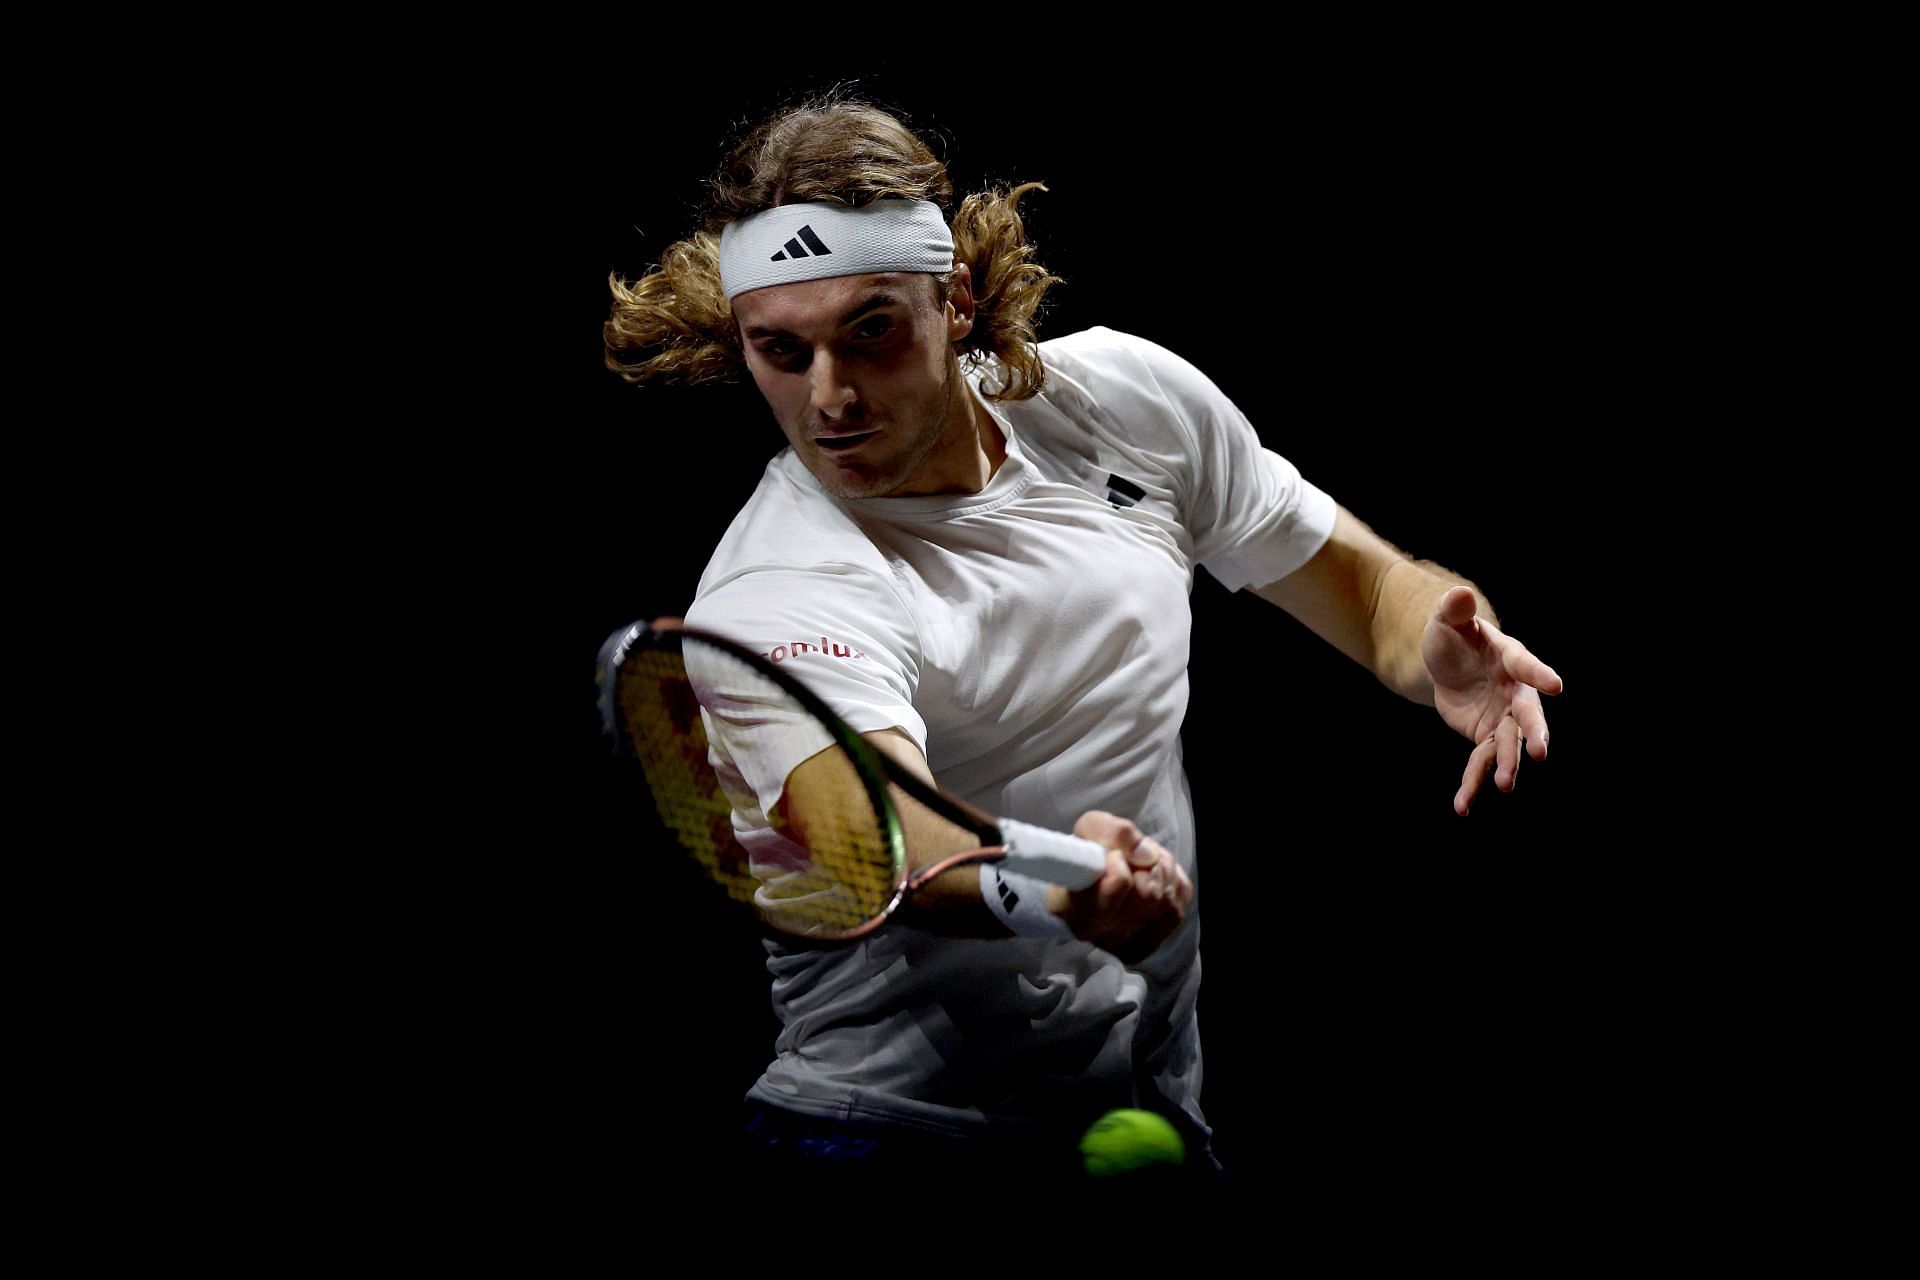 Stefanos Tsitsipas in action at the ABN AMRO Open in Rotterdam